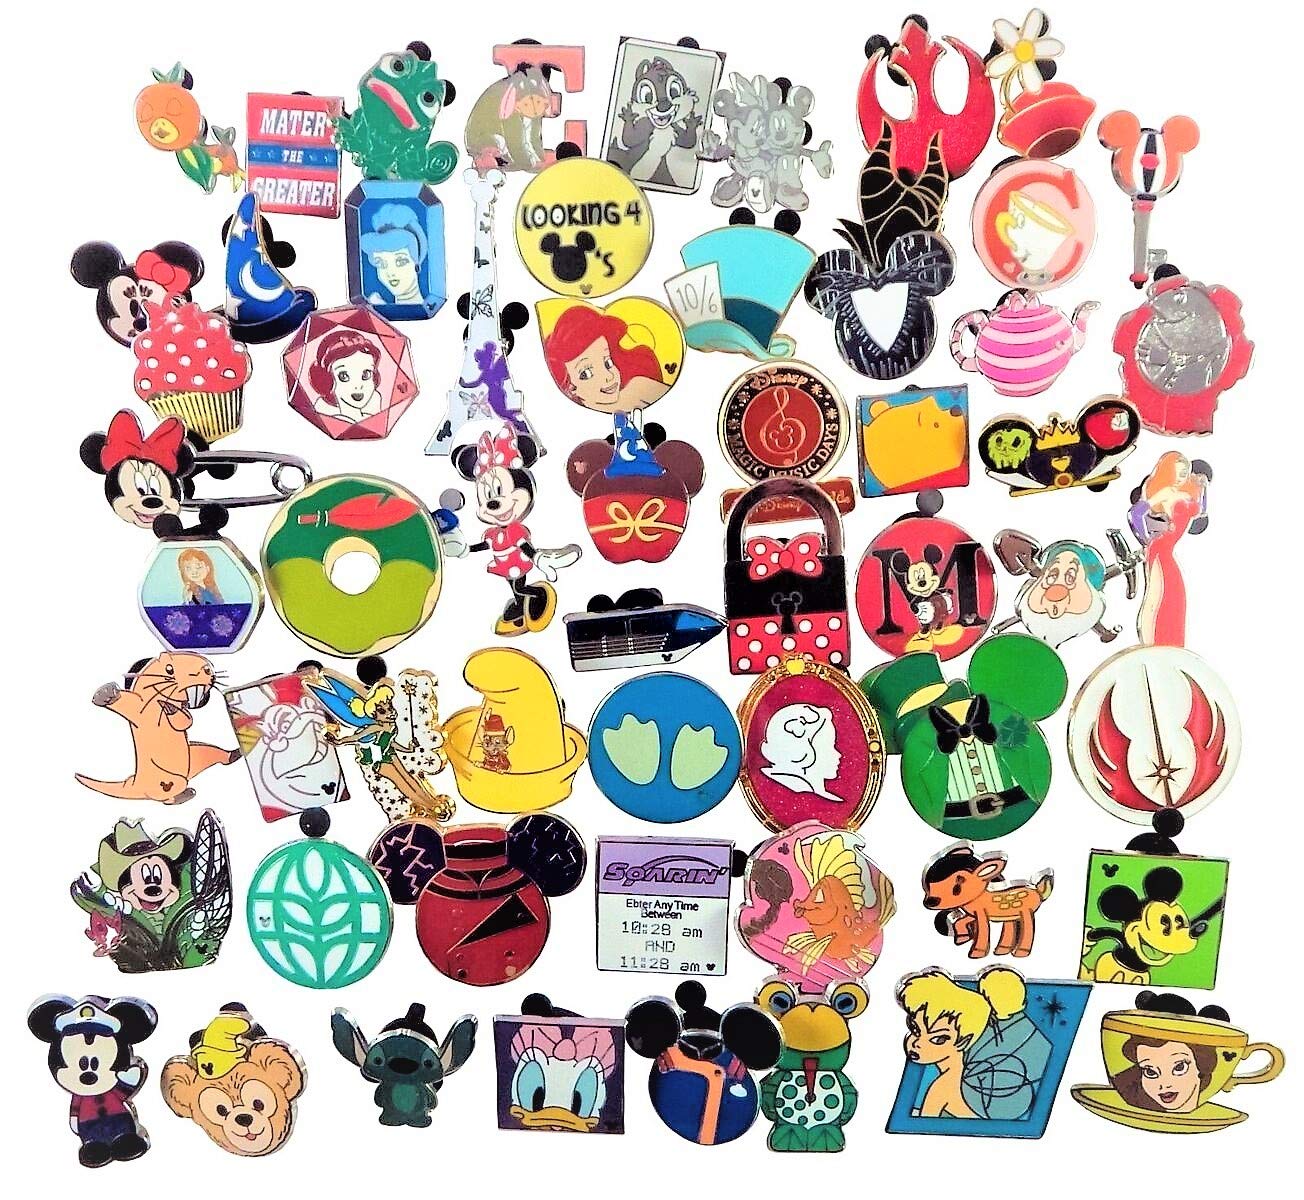 Cute Dicney Trading Pin Lot Mixed Pins with Lanyard - Tradable Metal Set Mickey Head Backing - 100% Tradable at Parks Collector- No Doubles - Assorted Pin Lot (15 Pin Lot & Disney Lanyard)